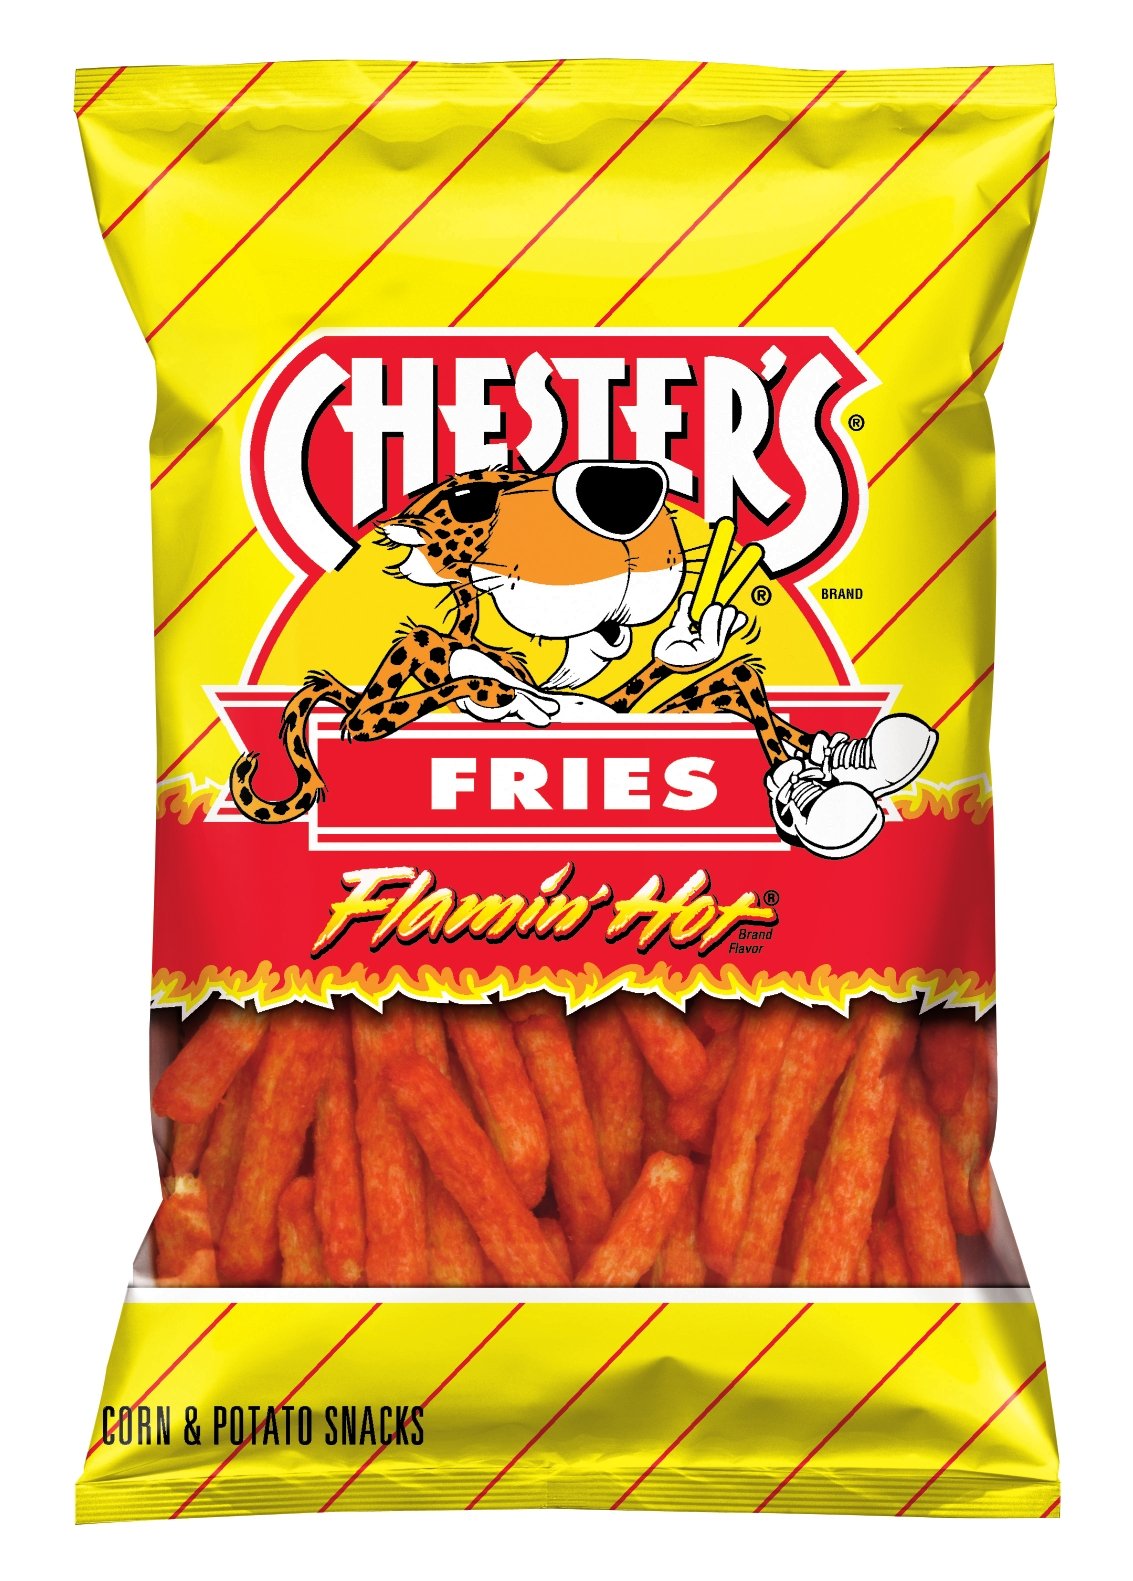 Chesters fries flamin hot